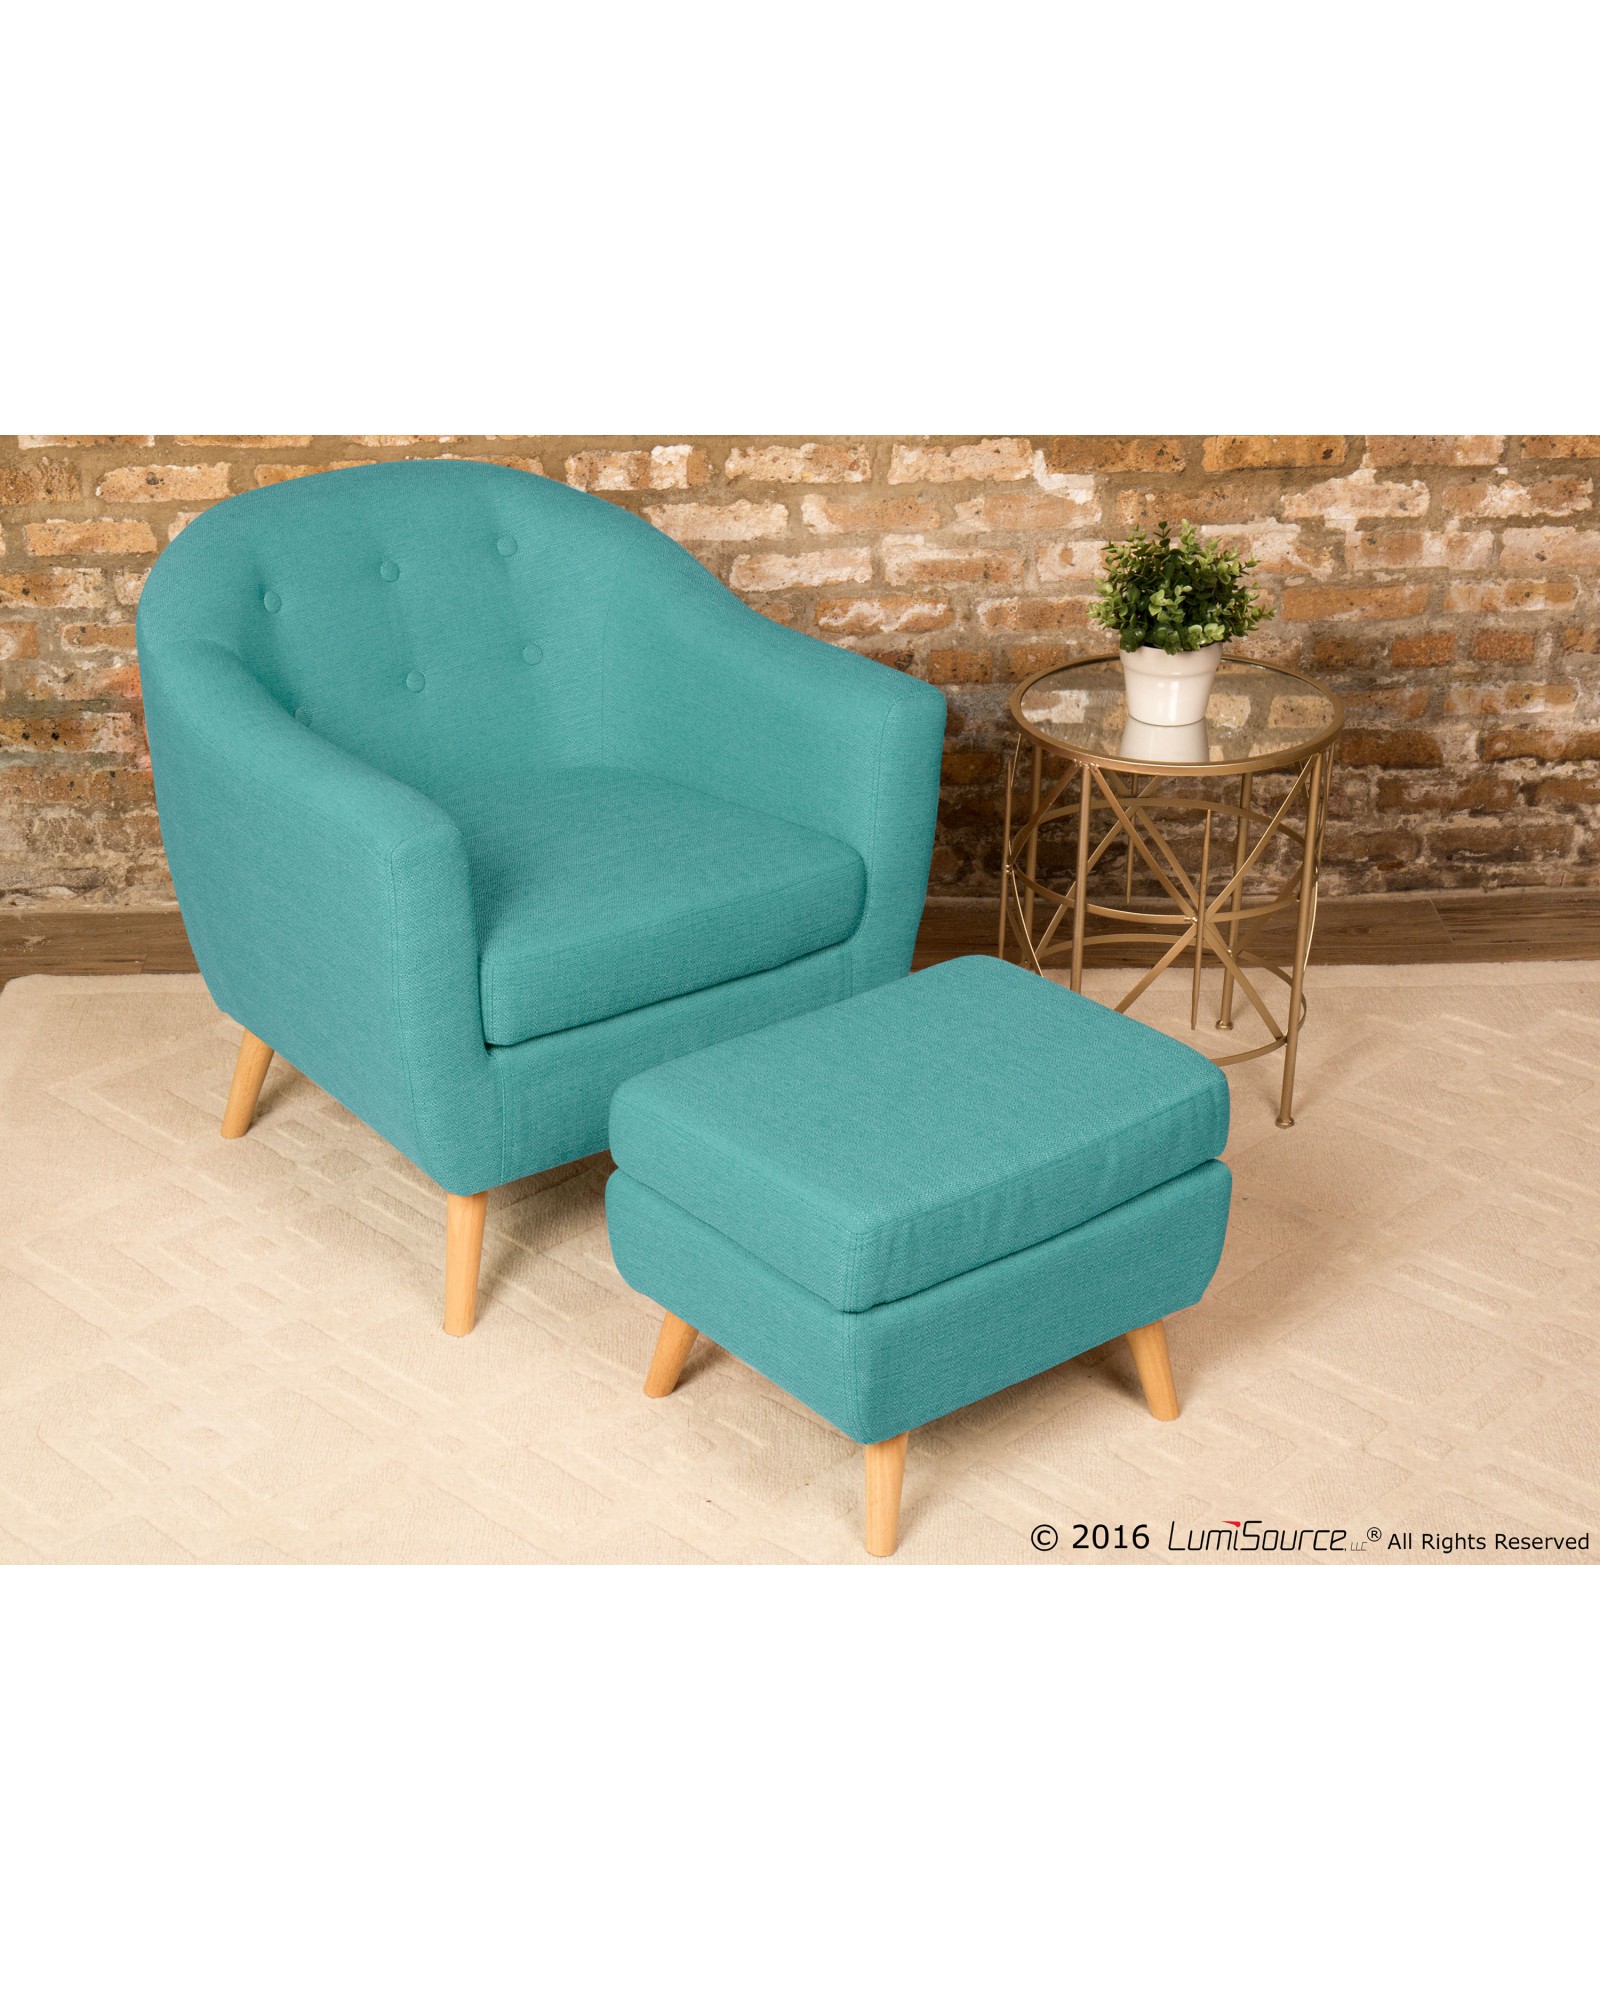 Rockwell Mid-Century Modern Accent Chair and Ottoman in Teal